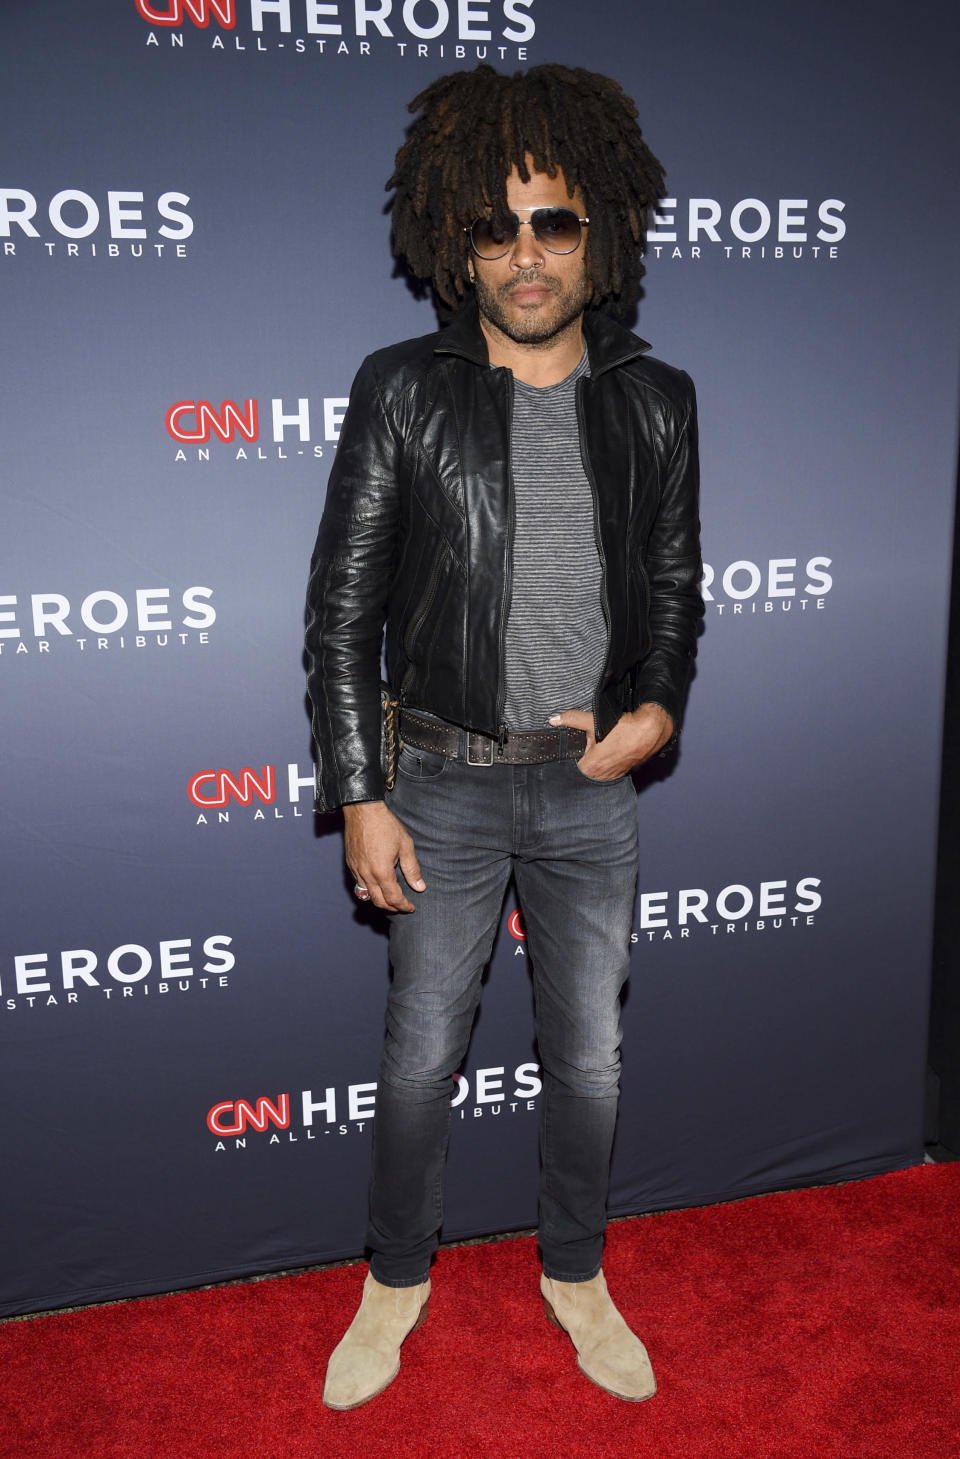 FILE - Musician Lenny Kravitz attends the 12th annual CNN Heroes: An All-Star Tribute in New York on Dec. 9, 2018. In a new memoir, "Let Love Rule," Kravitz explores his childhood and ends with him on the verge of stardom and deeply in love with actress Lisa Bonet. (Photo by Evan Agostini/Invision/AP, File)